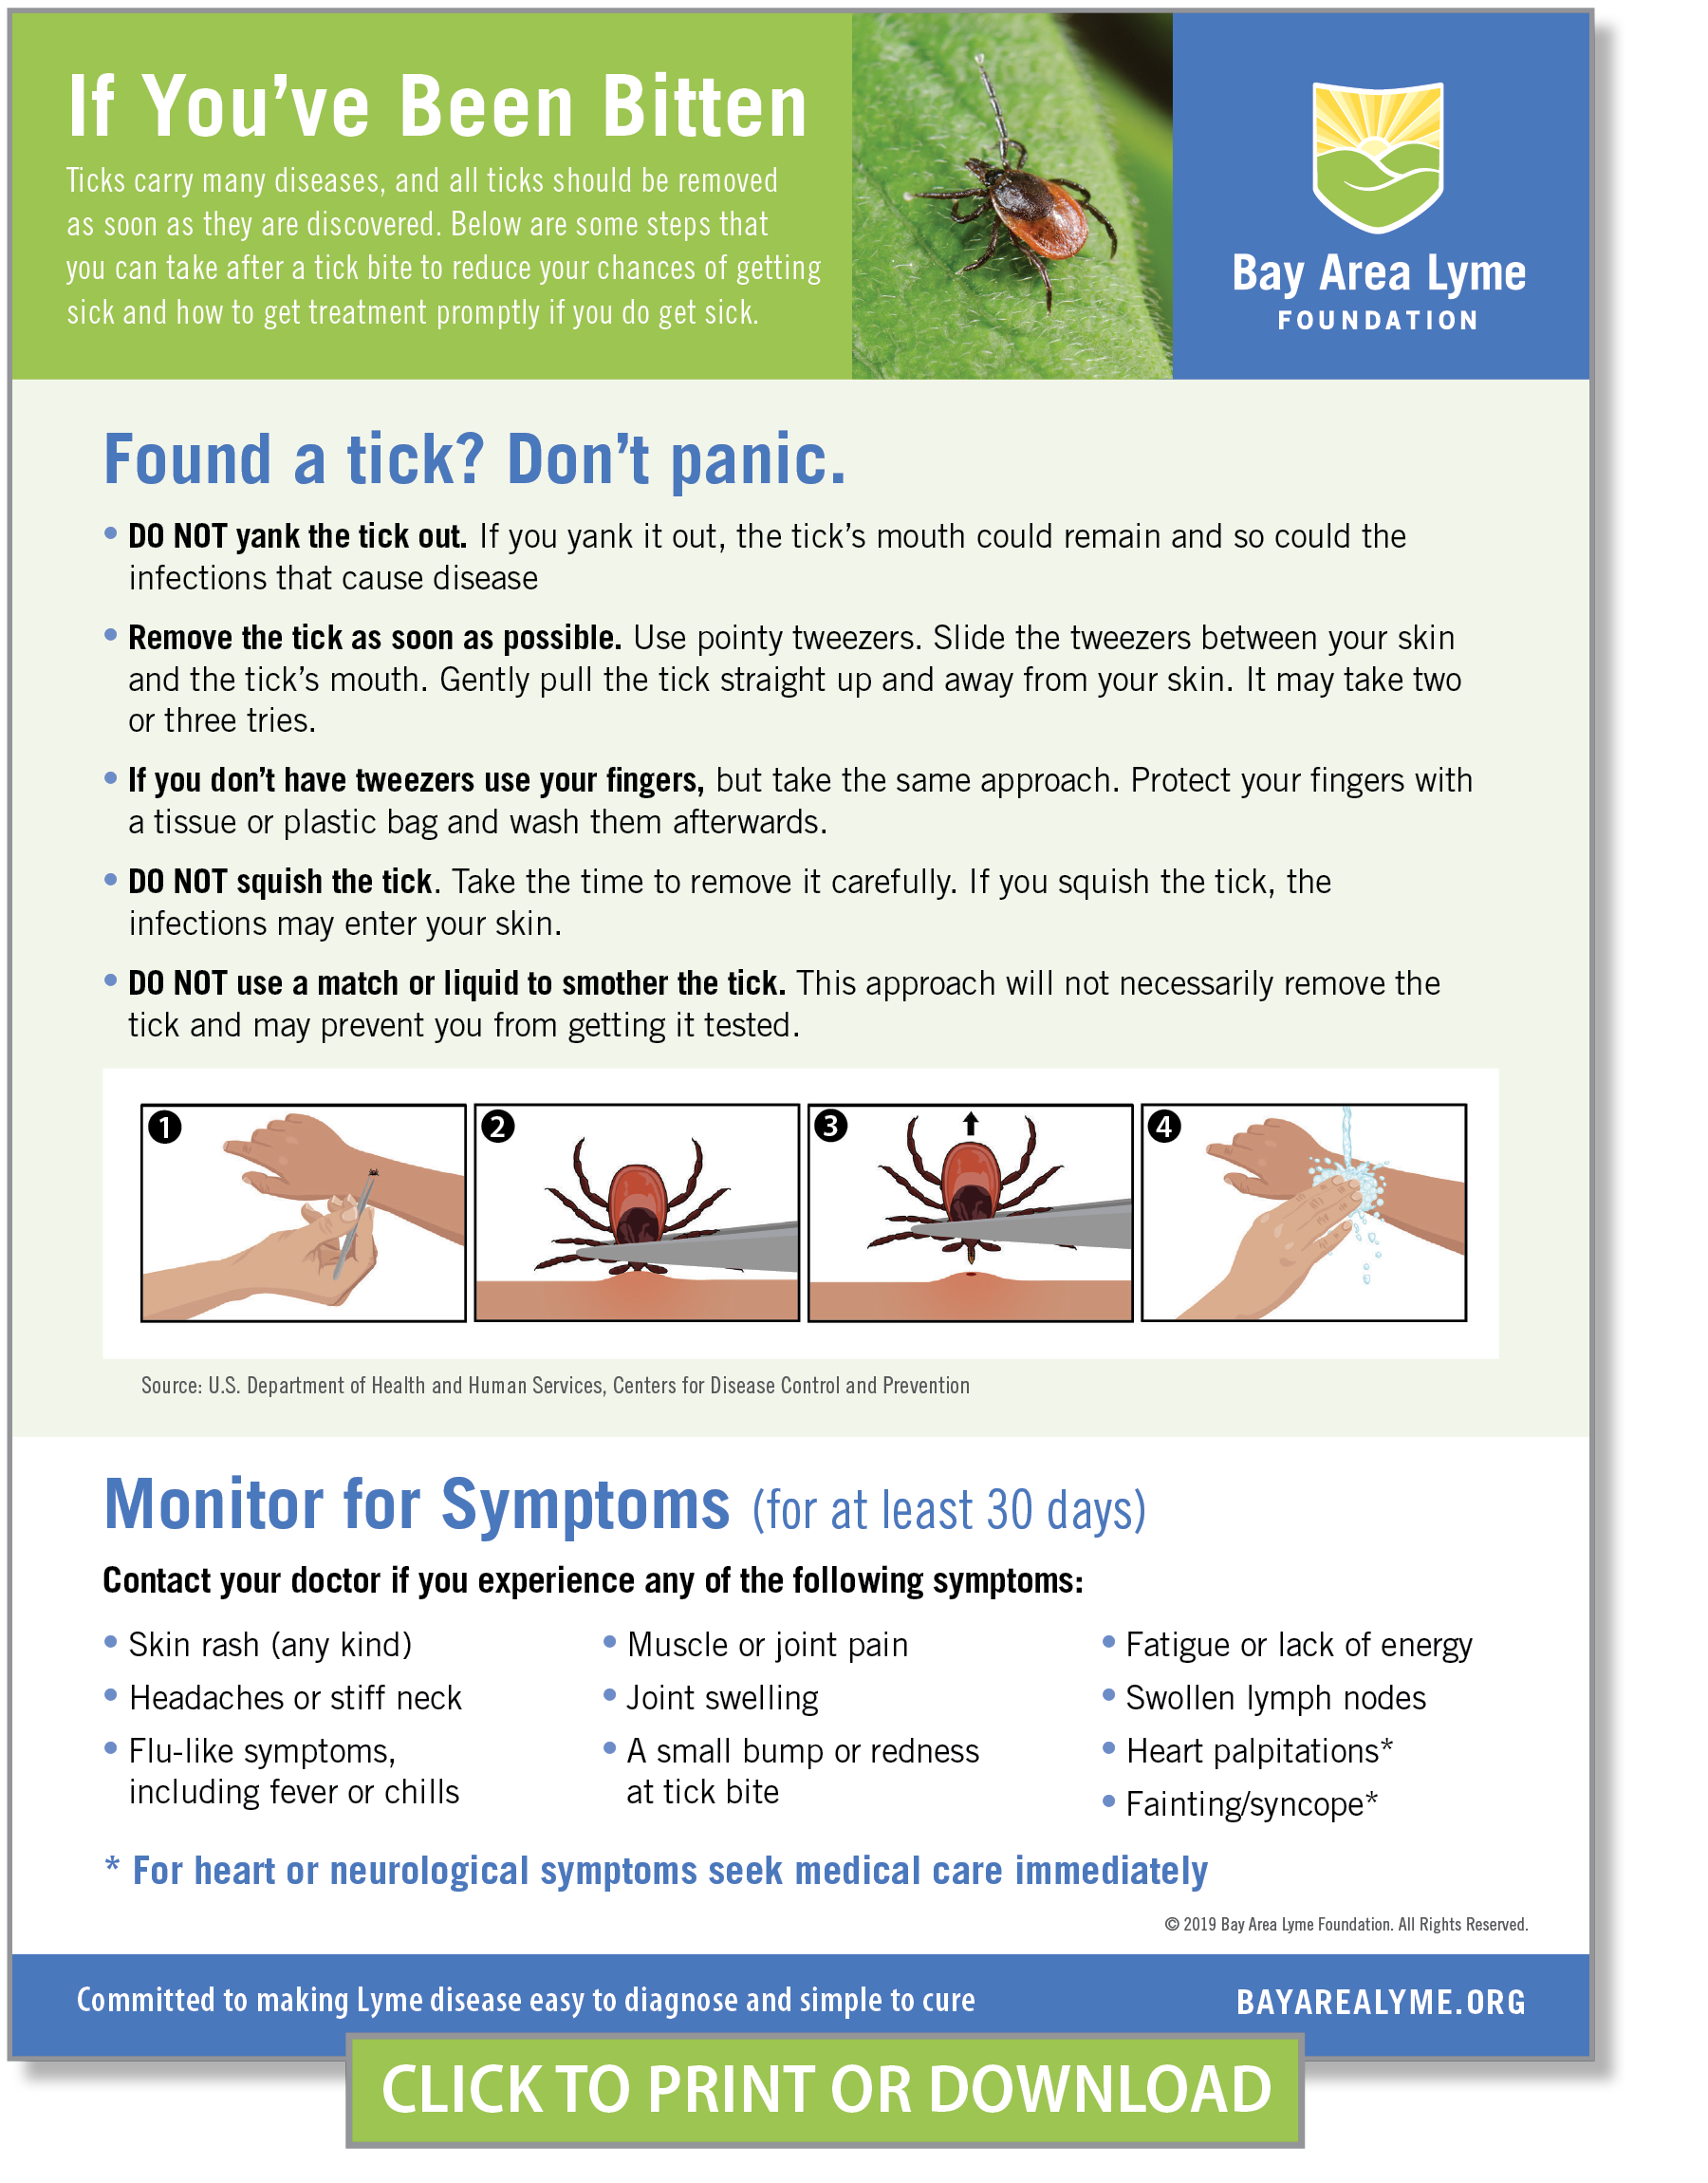 How to Remove a Tick - Bay Area Lyme Foundation